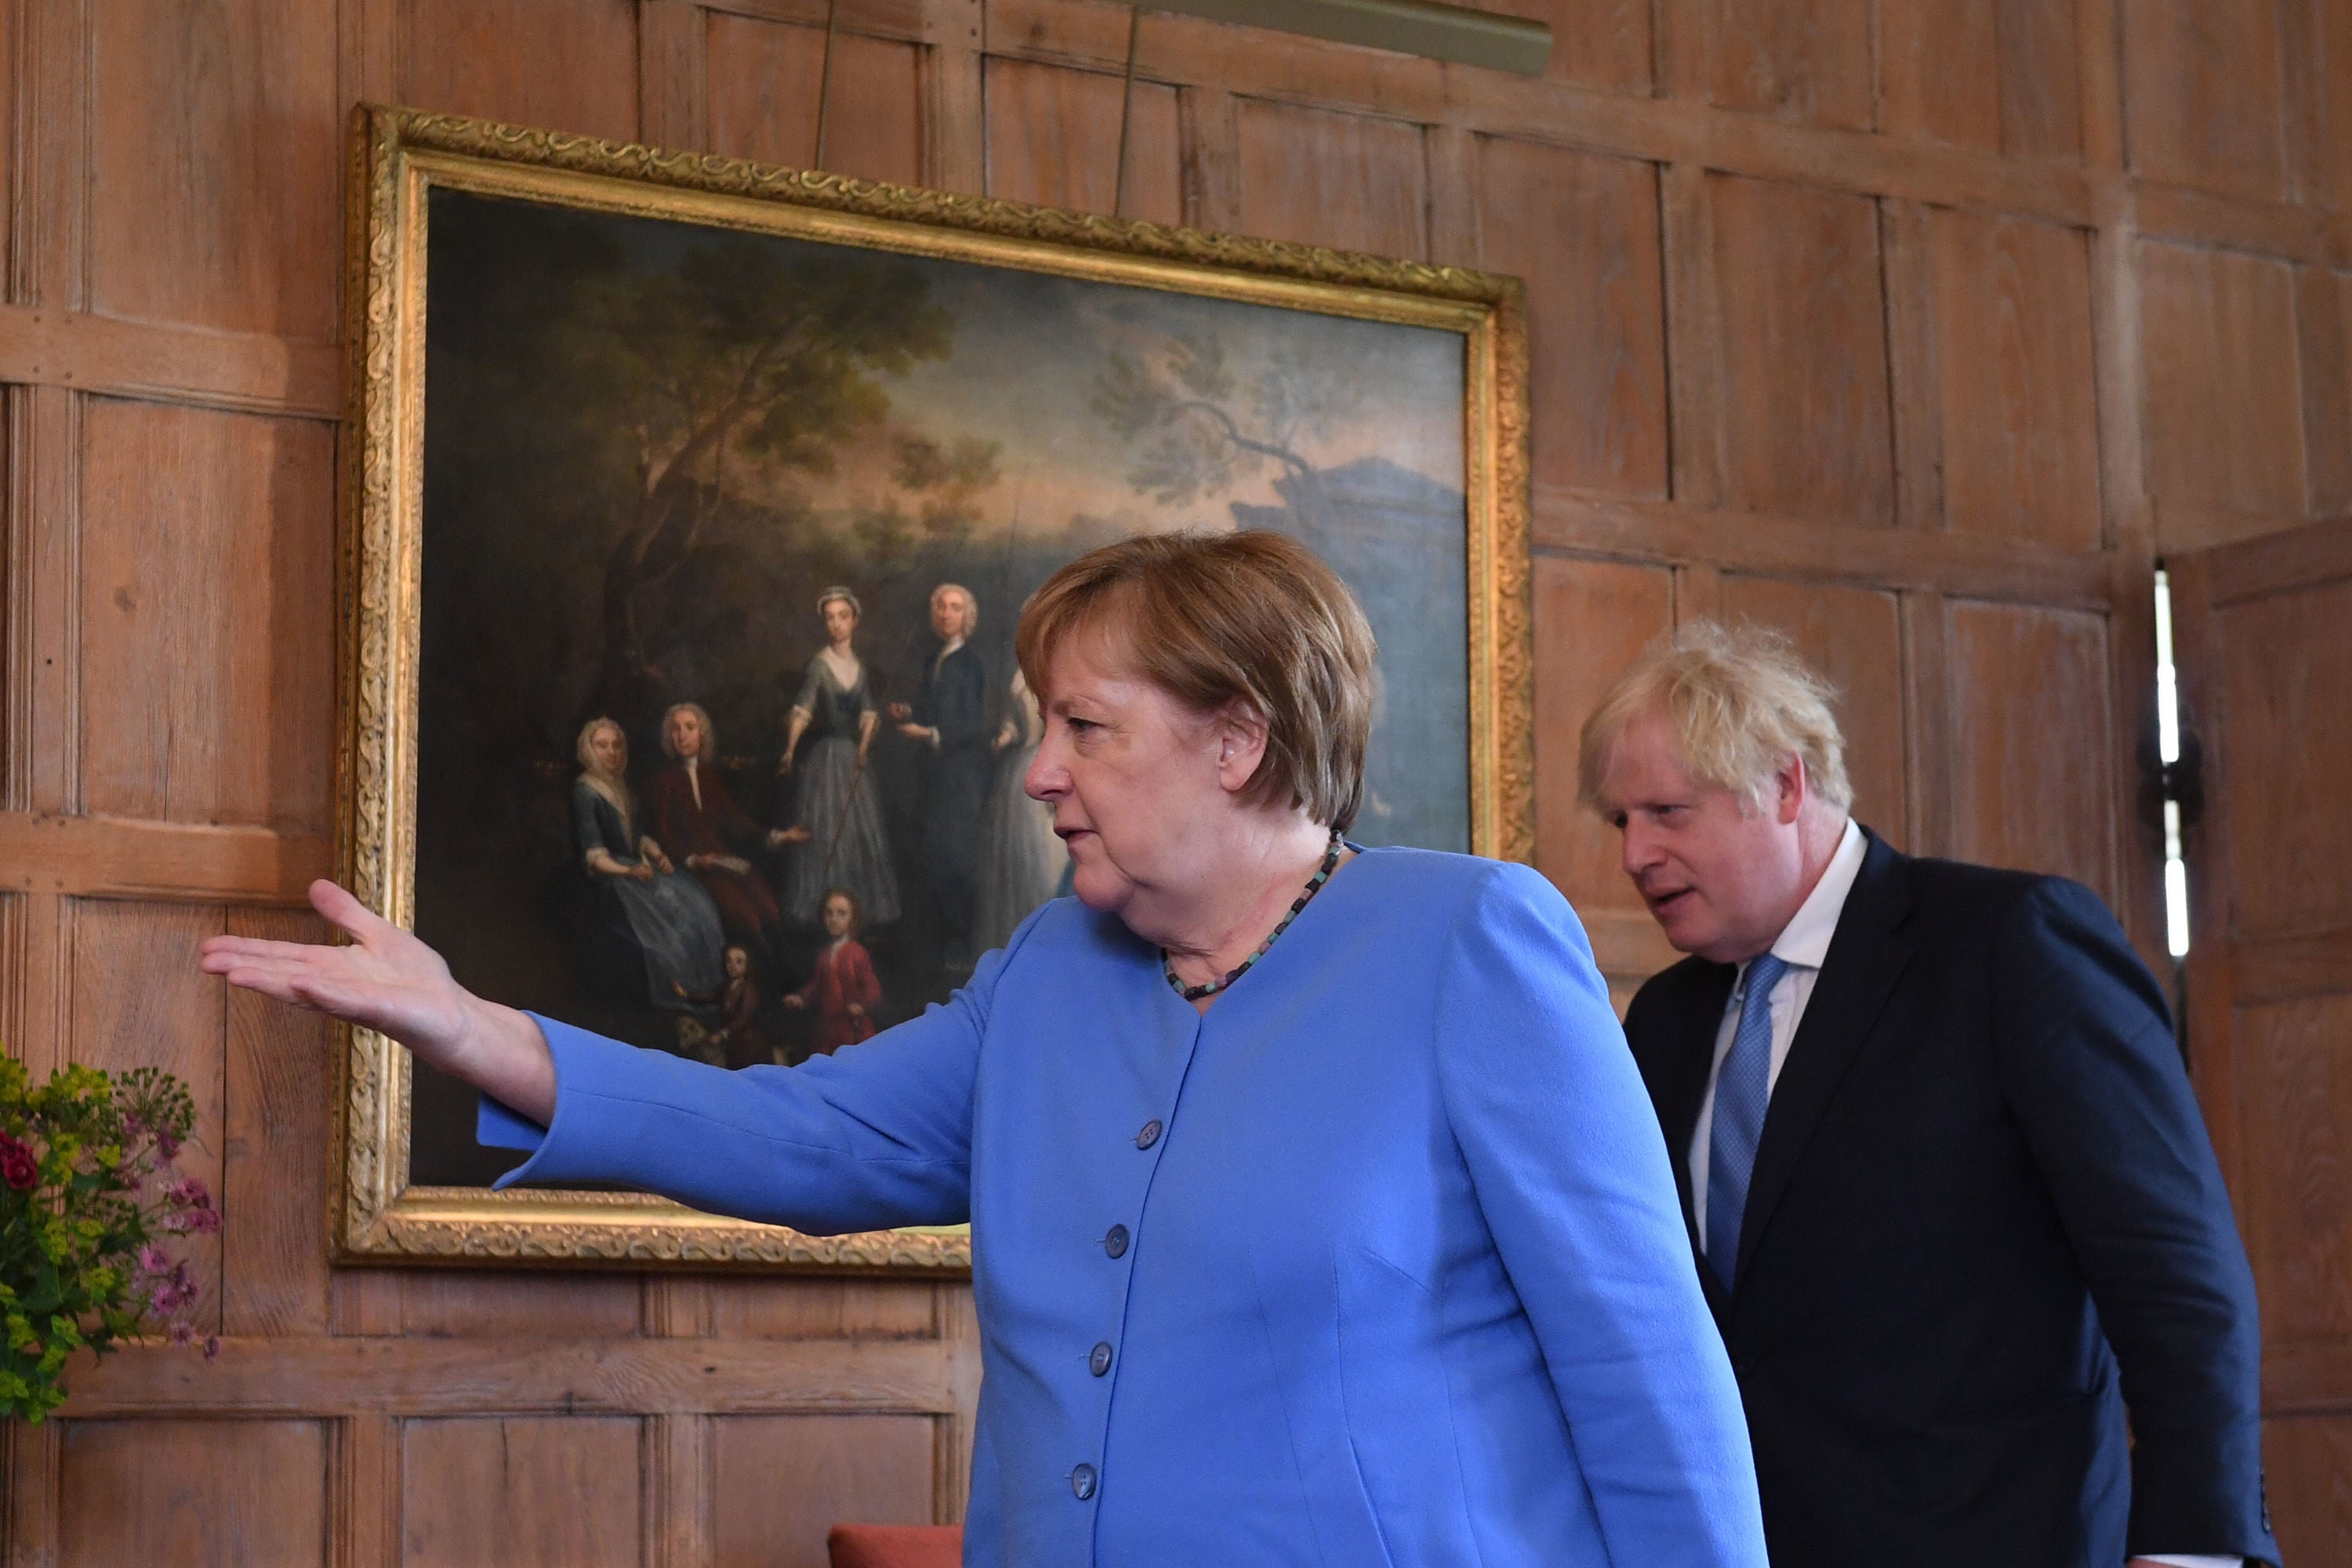 Boris Johnson and Angela Merkel ahead of Friday’s bilateral meeting at Chequers, the prime minister’s official country residence